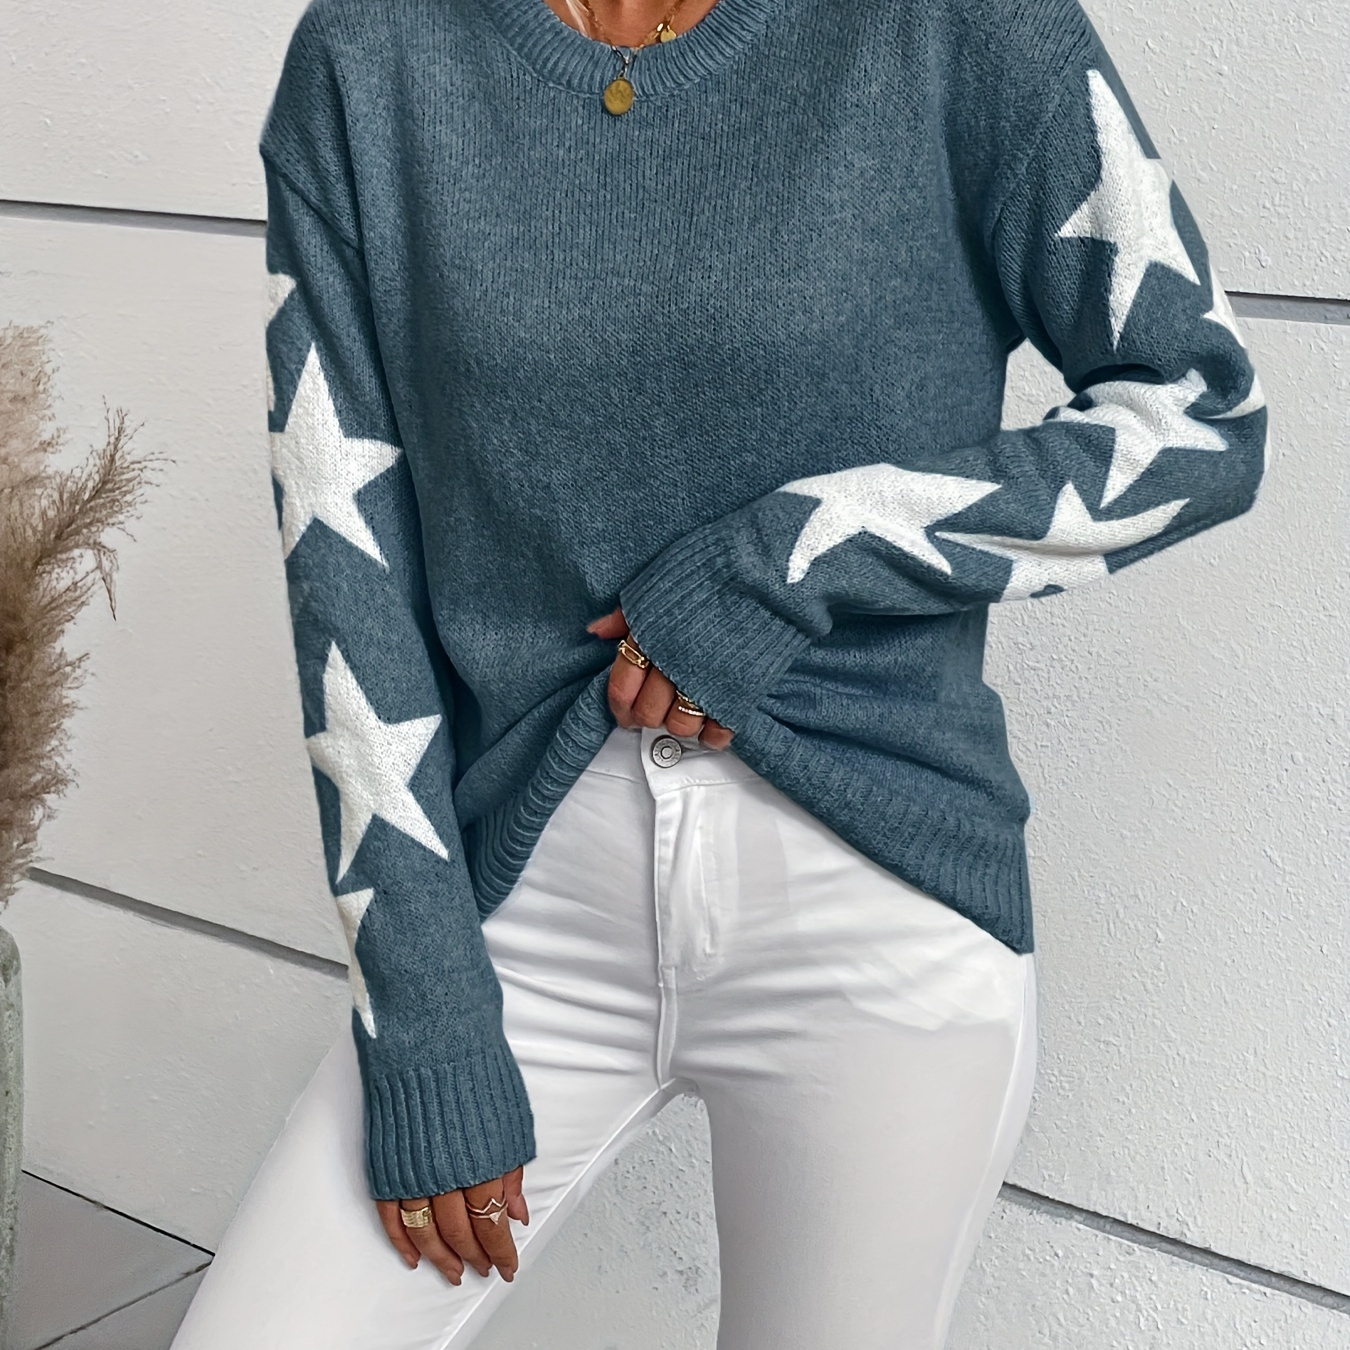 

Star Pattern Crew Neck Pullover Sweater, Vintage Long Sleeve Drop Shoulder Sweater, Women's Clothing